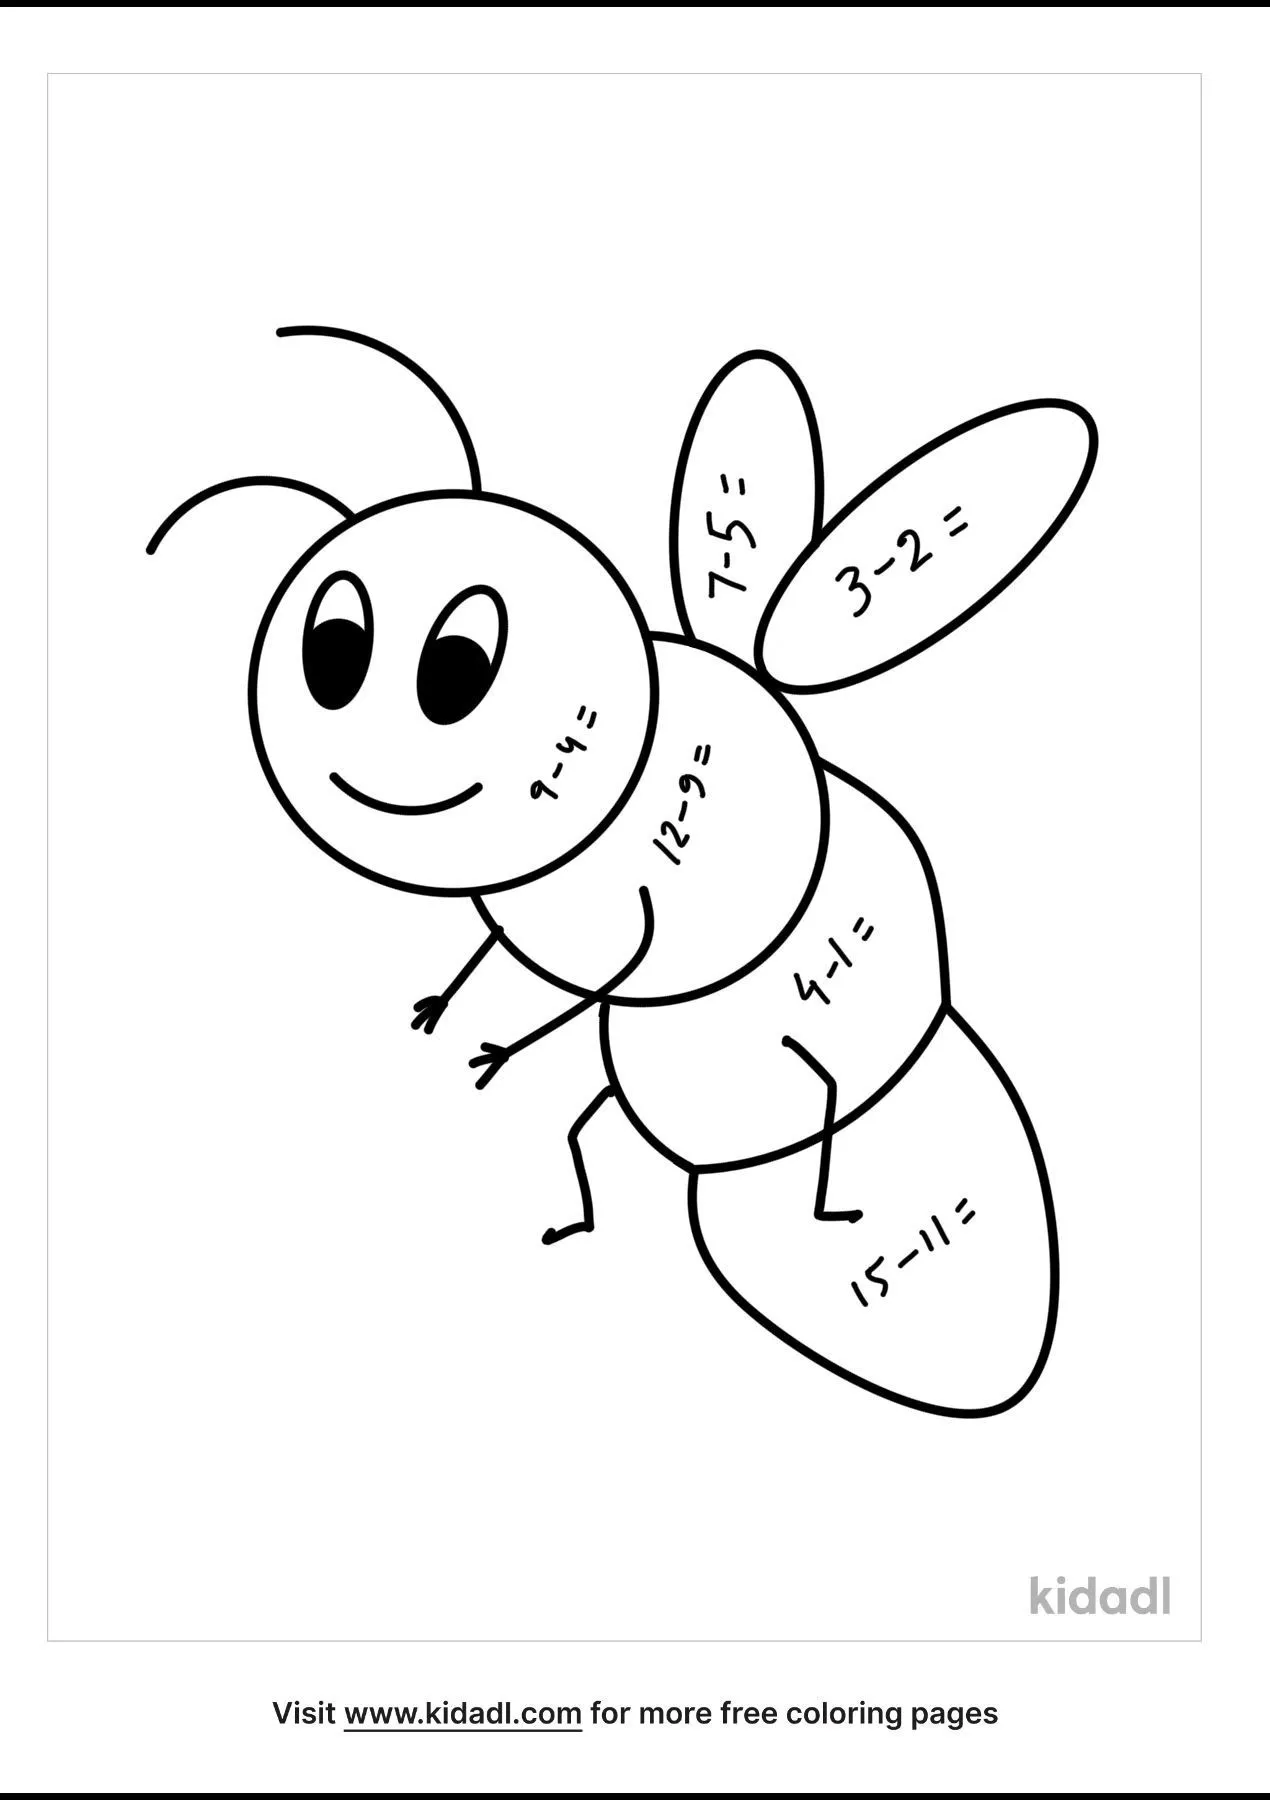 Crayon Coloring Pages   Free At Home Coloring Pages   Kidadl